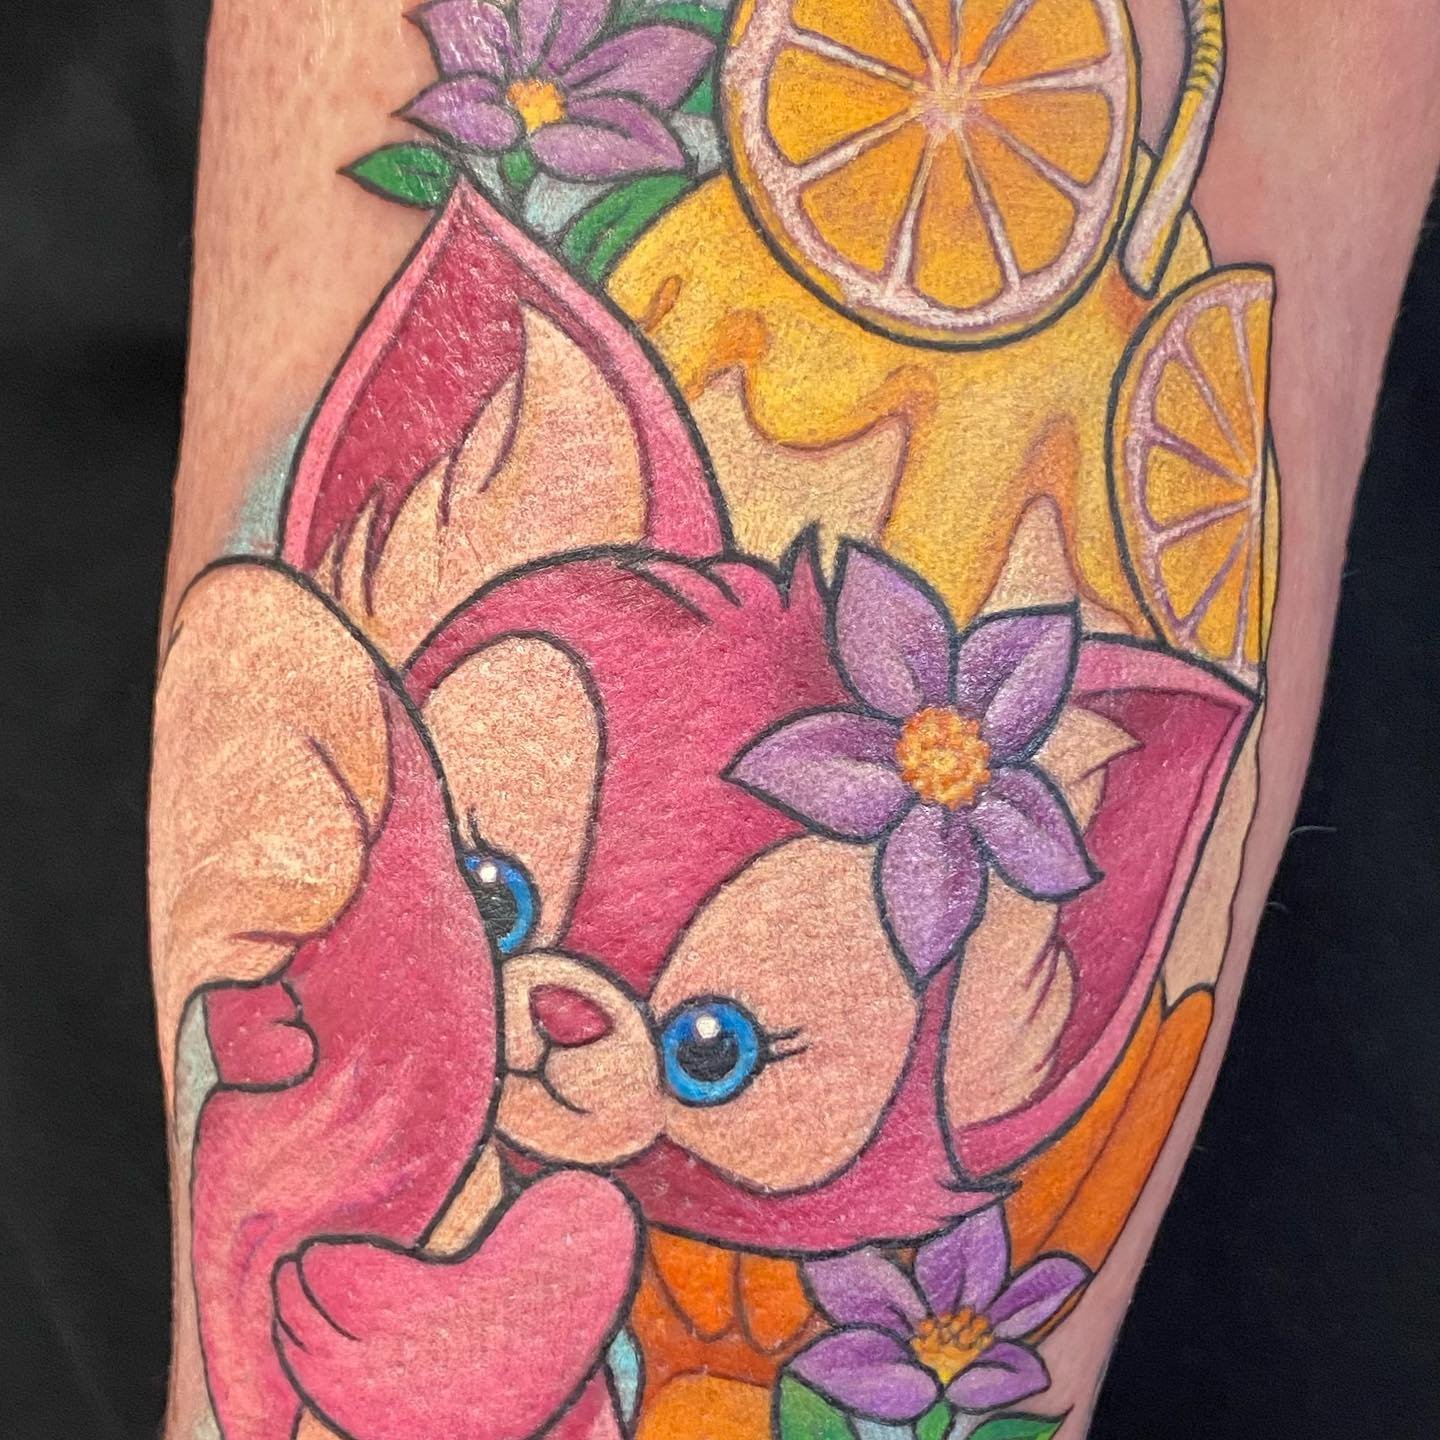 Linabell and Gelatoni for the wonderful Cat! 😊
Linabell taught me about shaved ice. Made this year? Last year? I don&rsquo;t know anymore 😂

Made with @fusion_ink and @killerinktattoo supplies in #edinburgh

#linabell #gelatoni #duffyandfriends #di